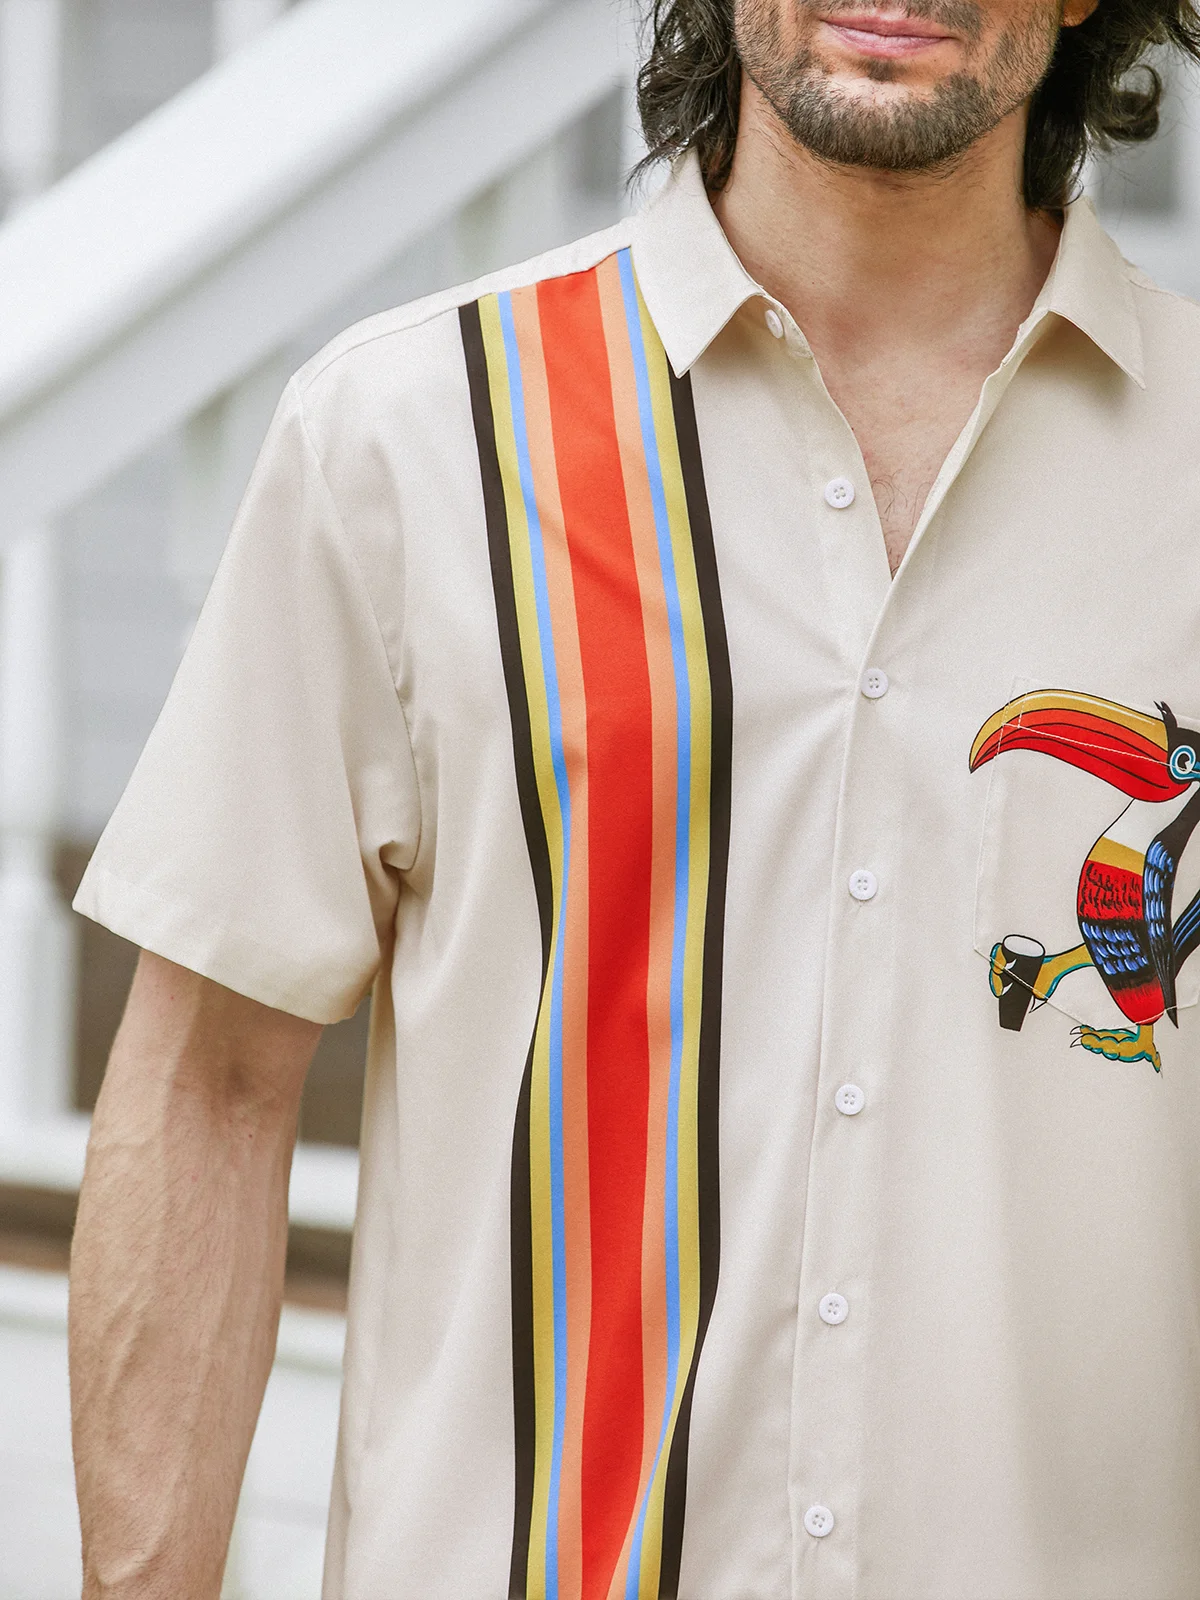 Hardaddy Moisture-wicking Toucan Chest Pocket Bowling Shirt